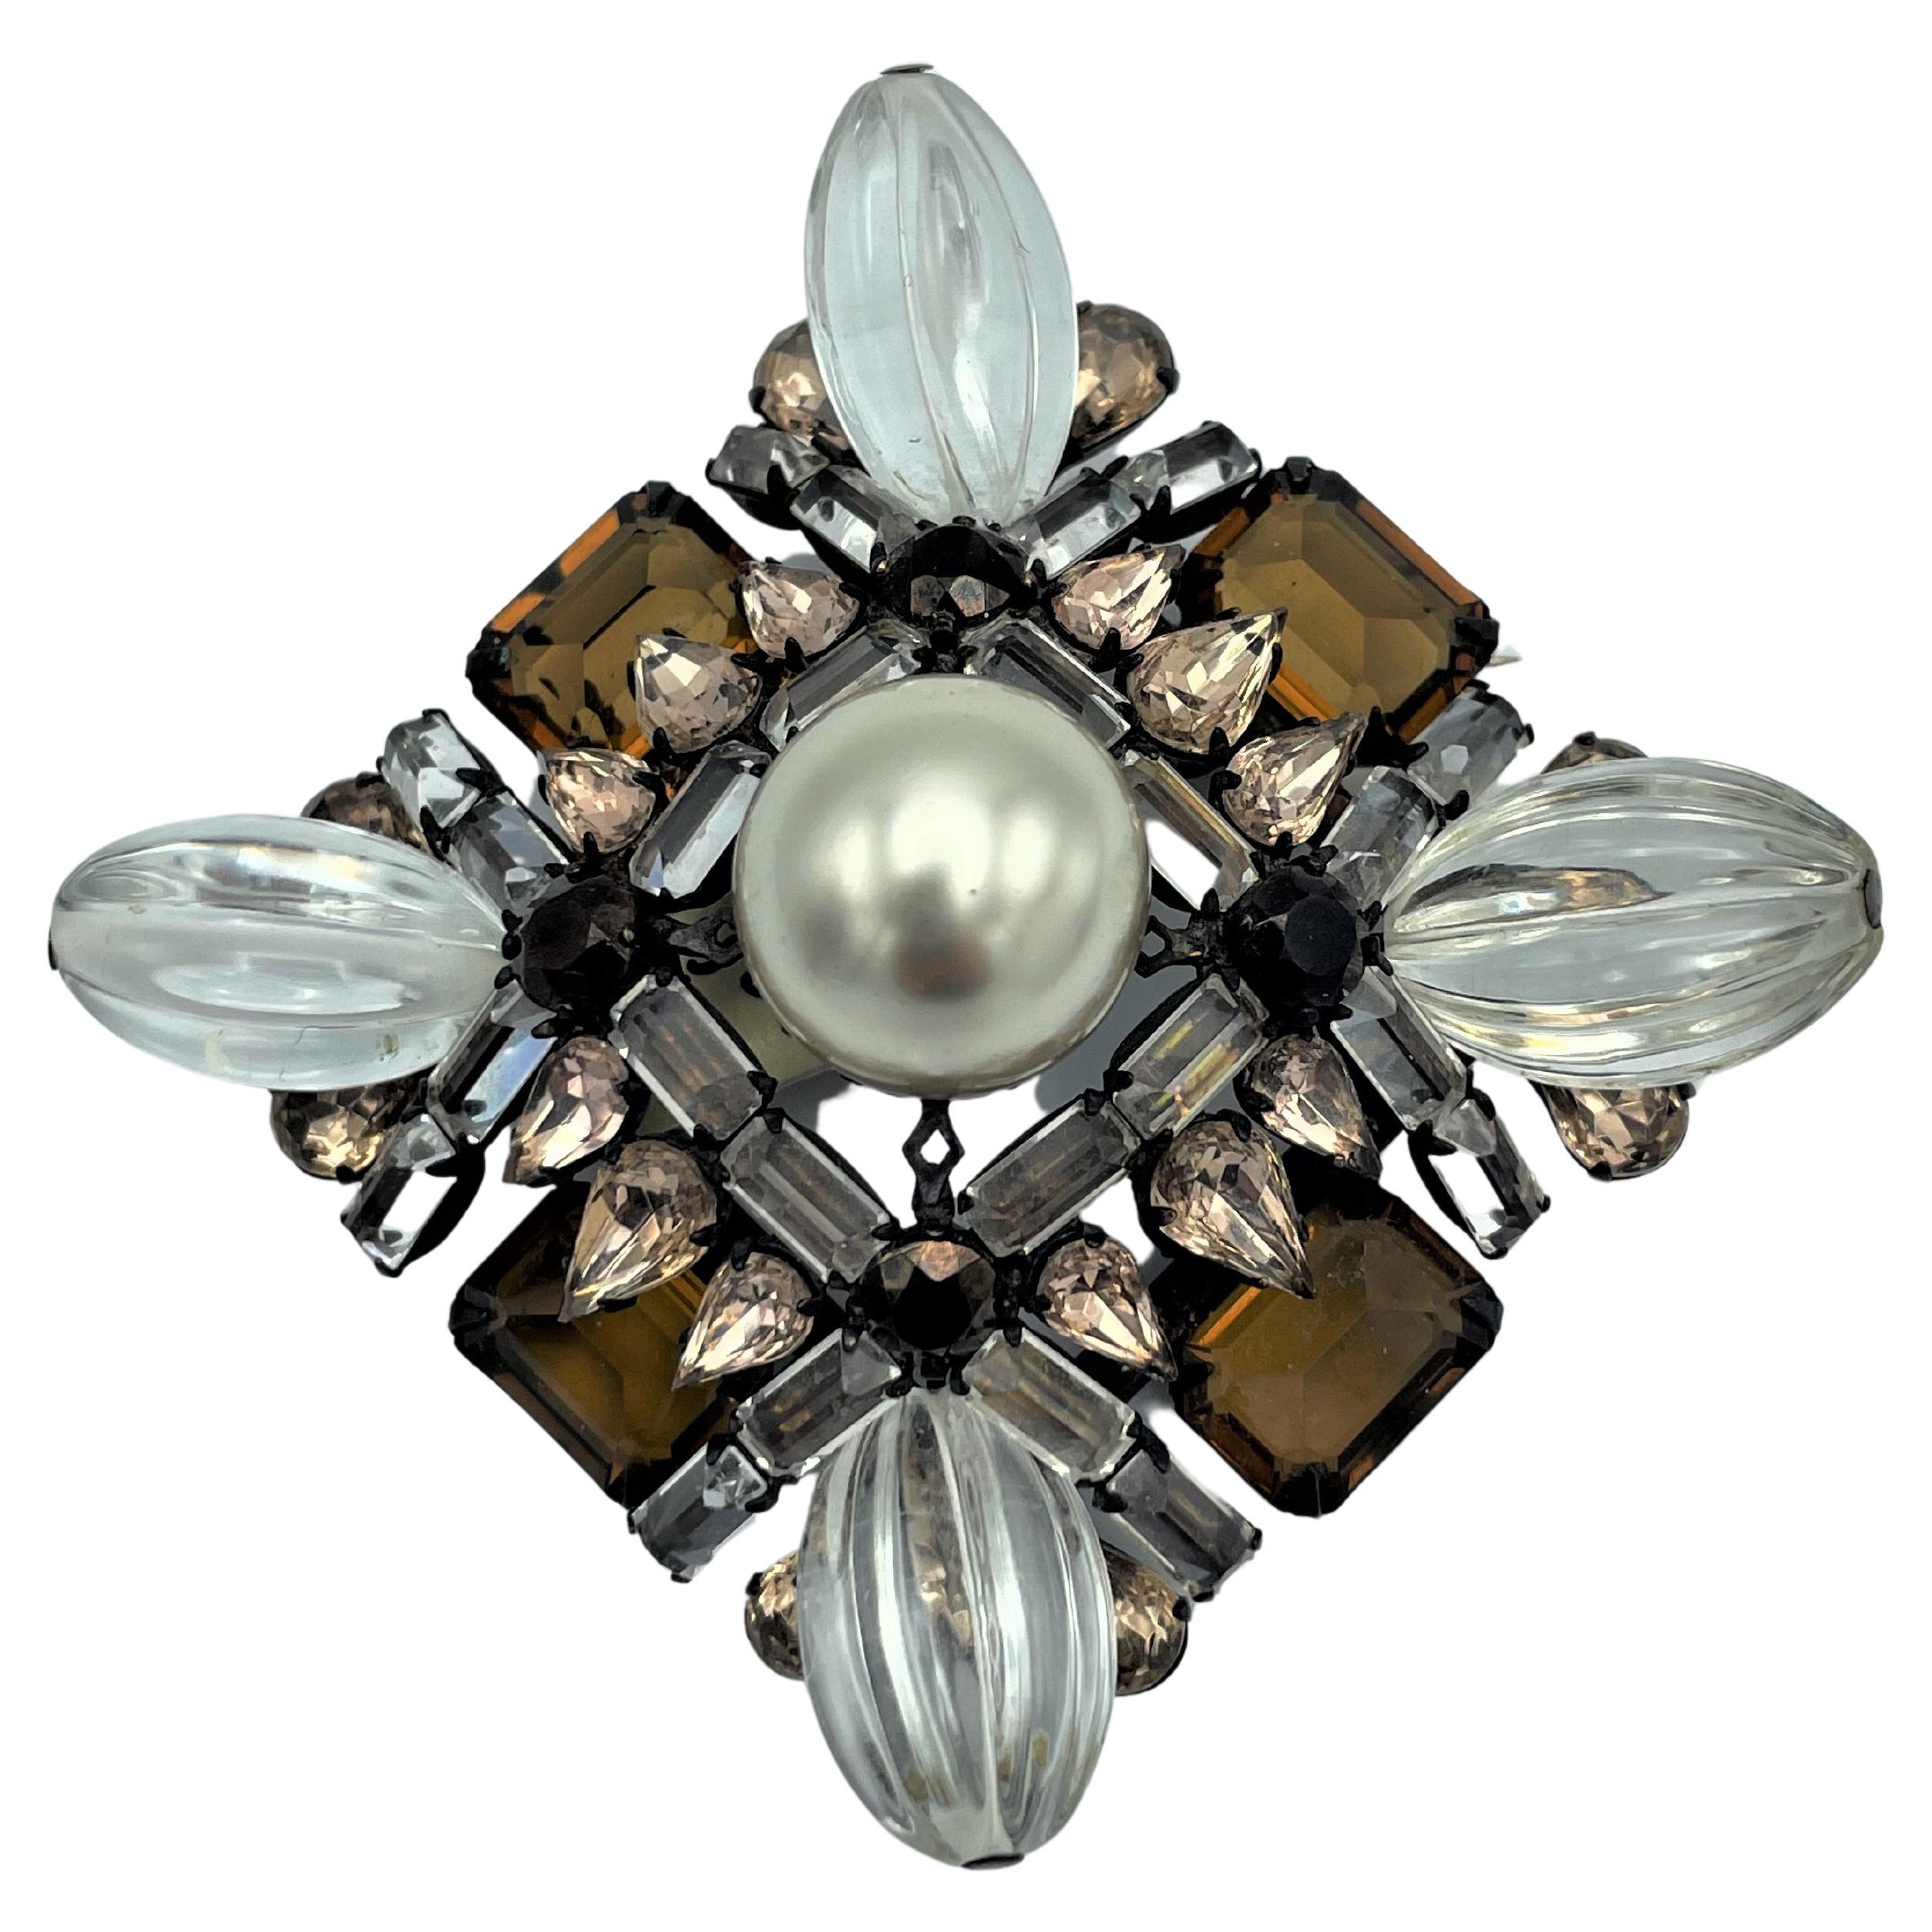 About

Henry Schreiner's brooch has a square shape and is built on 3 levels. The crowning glory is a 2 cm handcrafted pearl. In between different topaz colored rhinestones in different shapes and sizes. 4 clear elliptical forms protrude from he